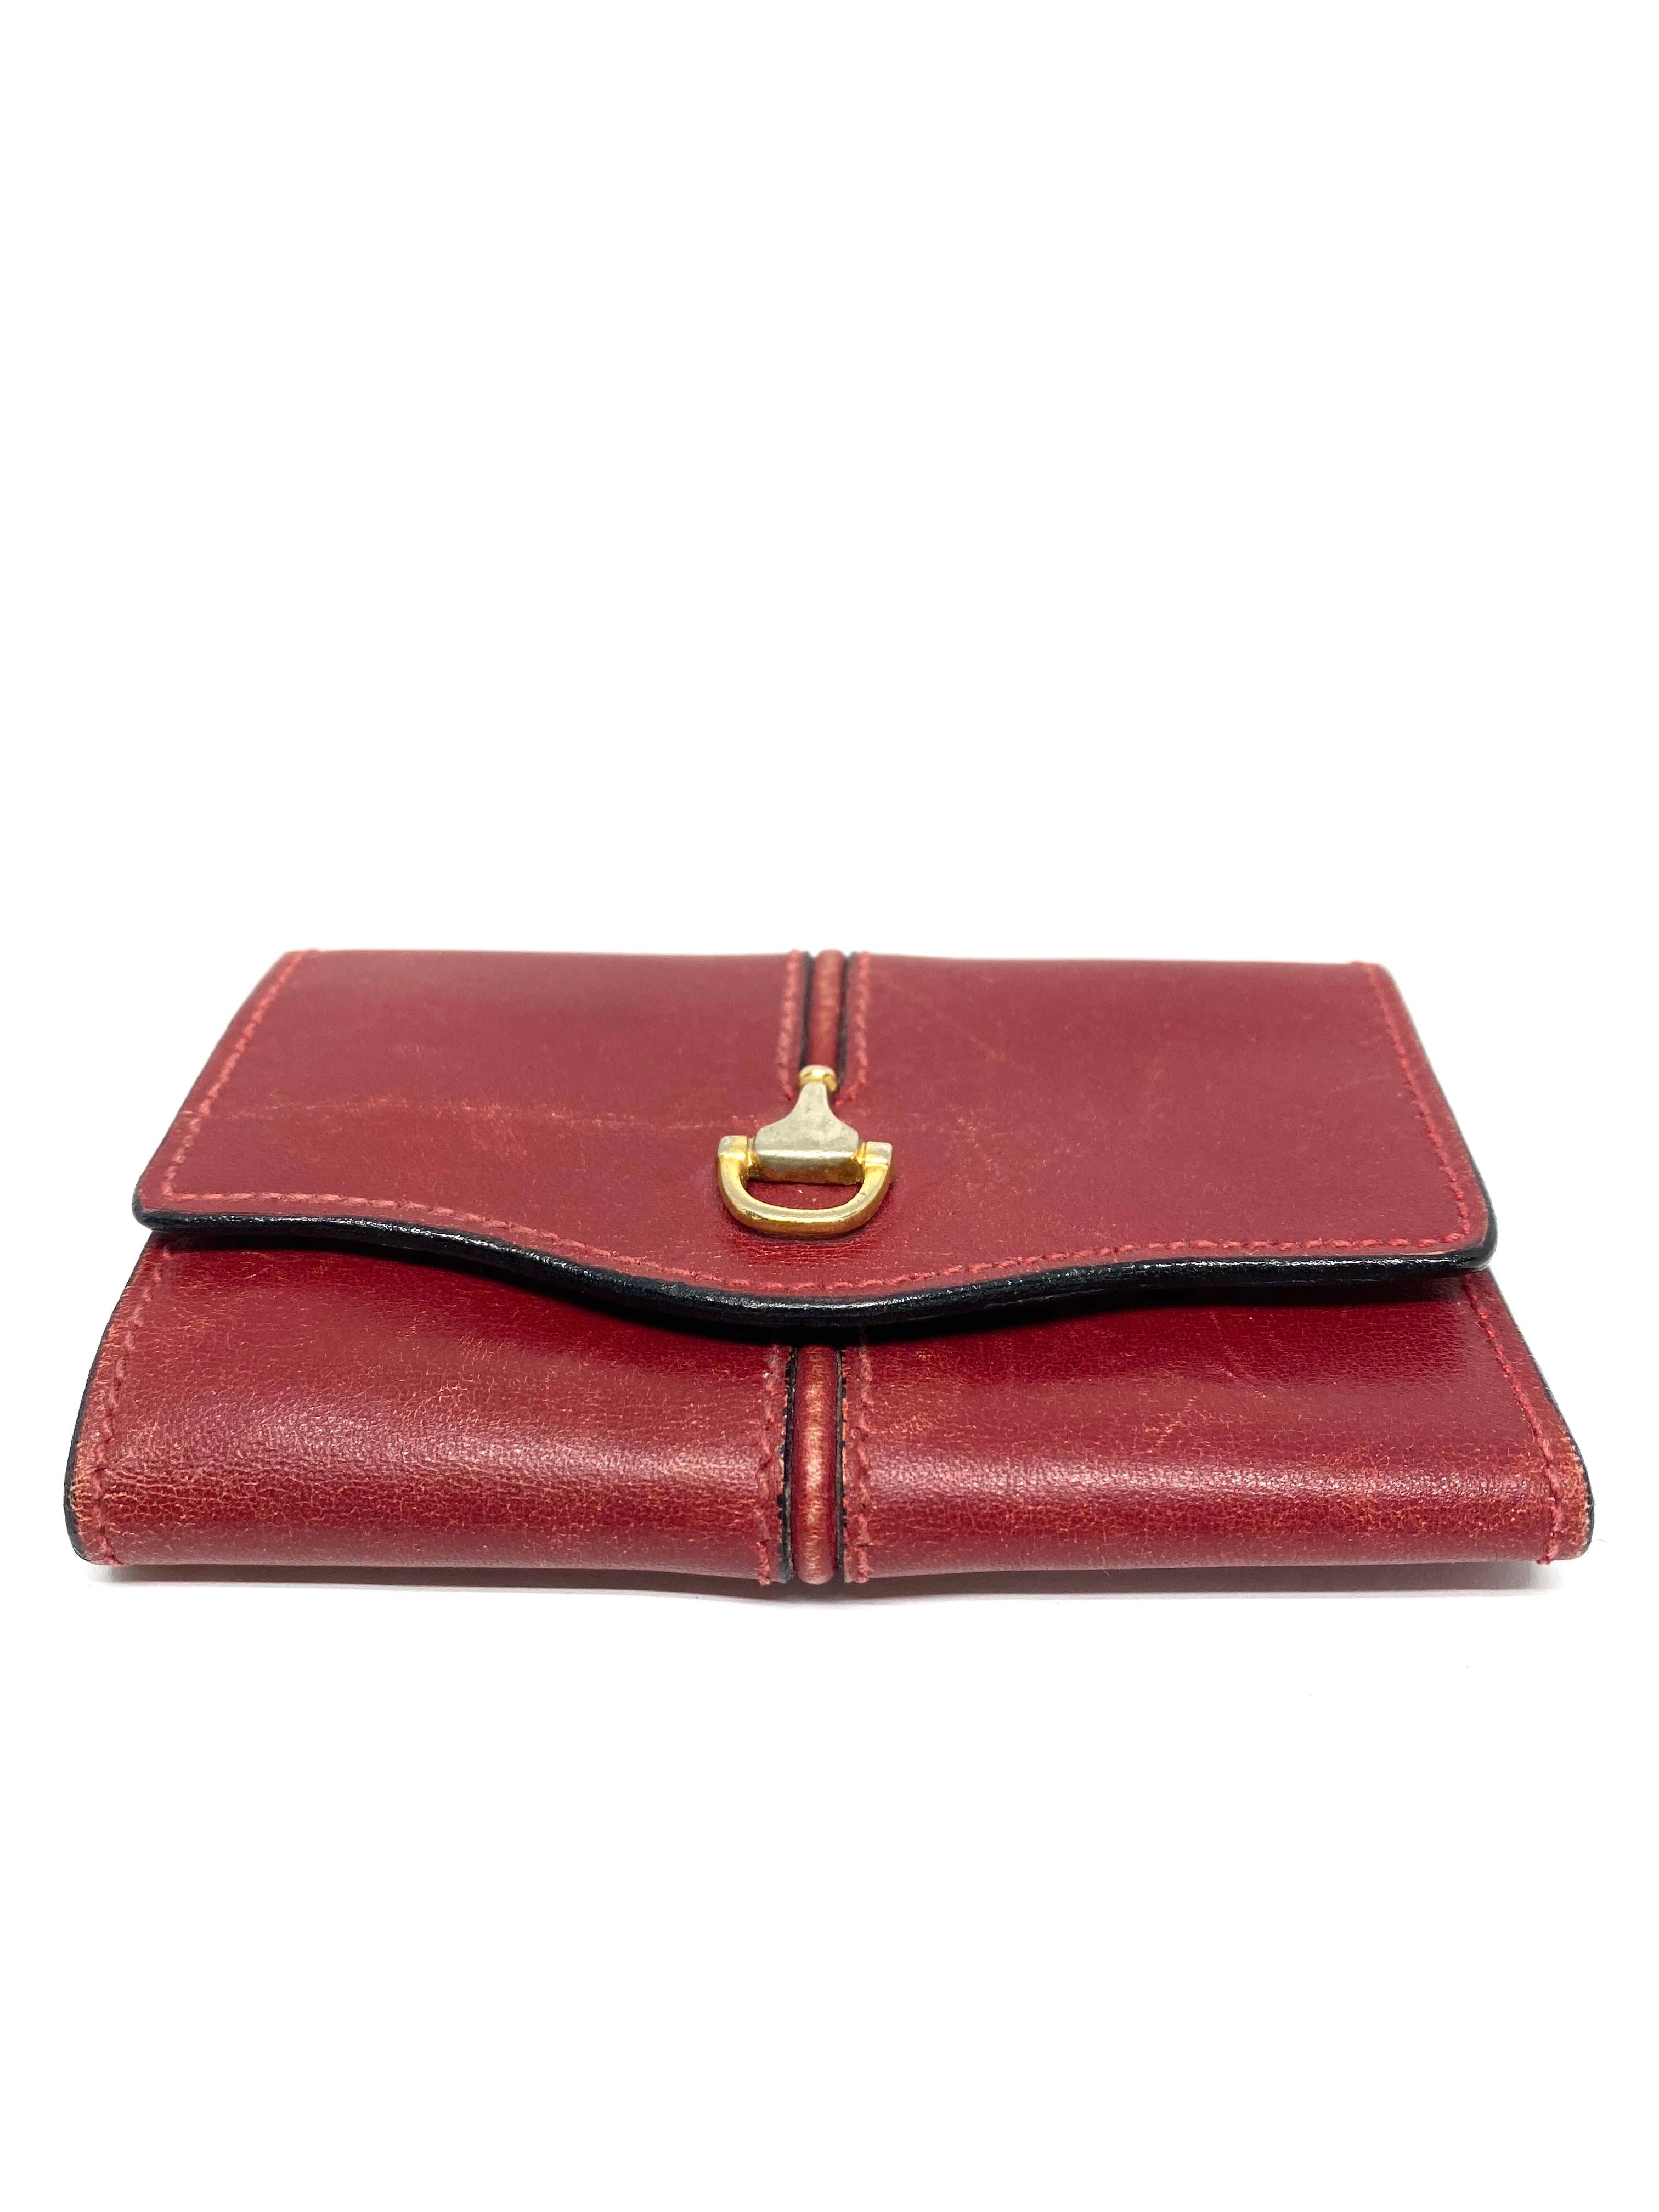 1960s GUCCI Red Leather Key Holder Wallet

Product details:
Red leather tri fold keychain wallet 
Gold tone hardware
Featuring six hooks for the keys and one pocket on the left side 
Made in Italy
